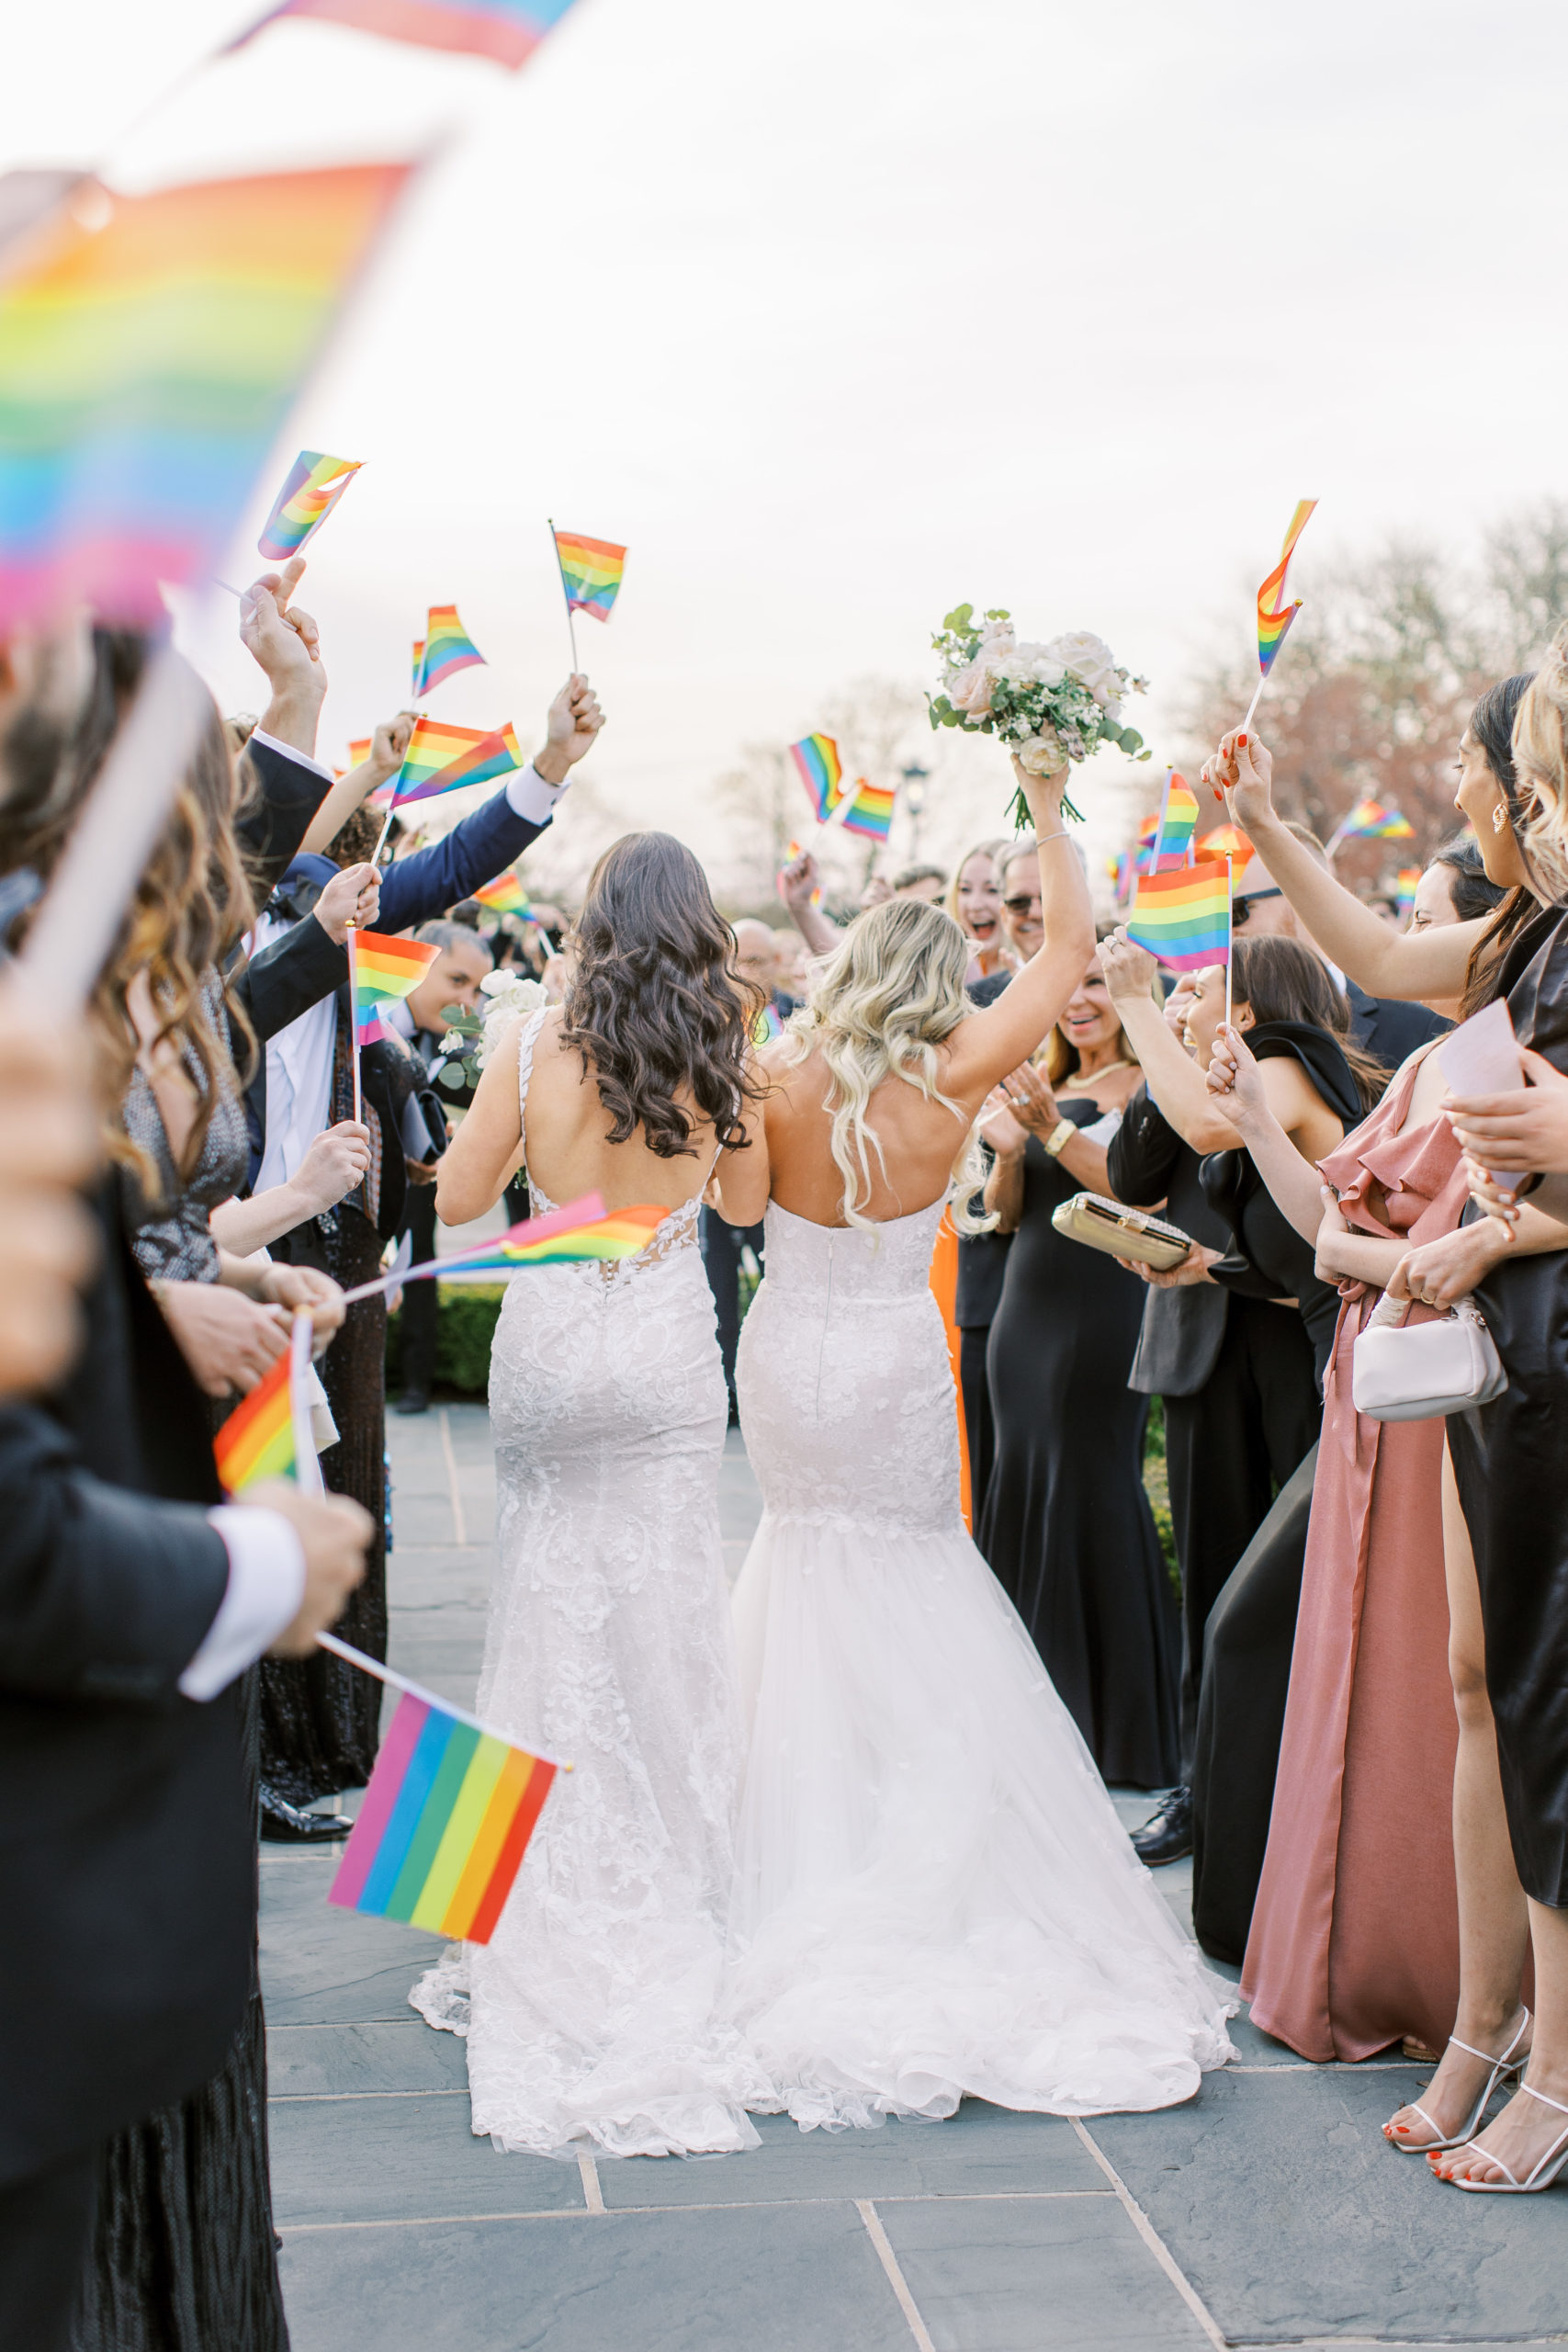 Brides hold bouquets after being married with friends and family holding pride flags at a Romantic Park Chateau Wedding Photography